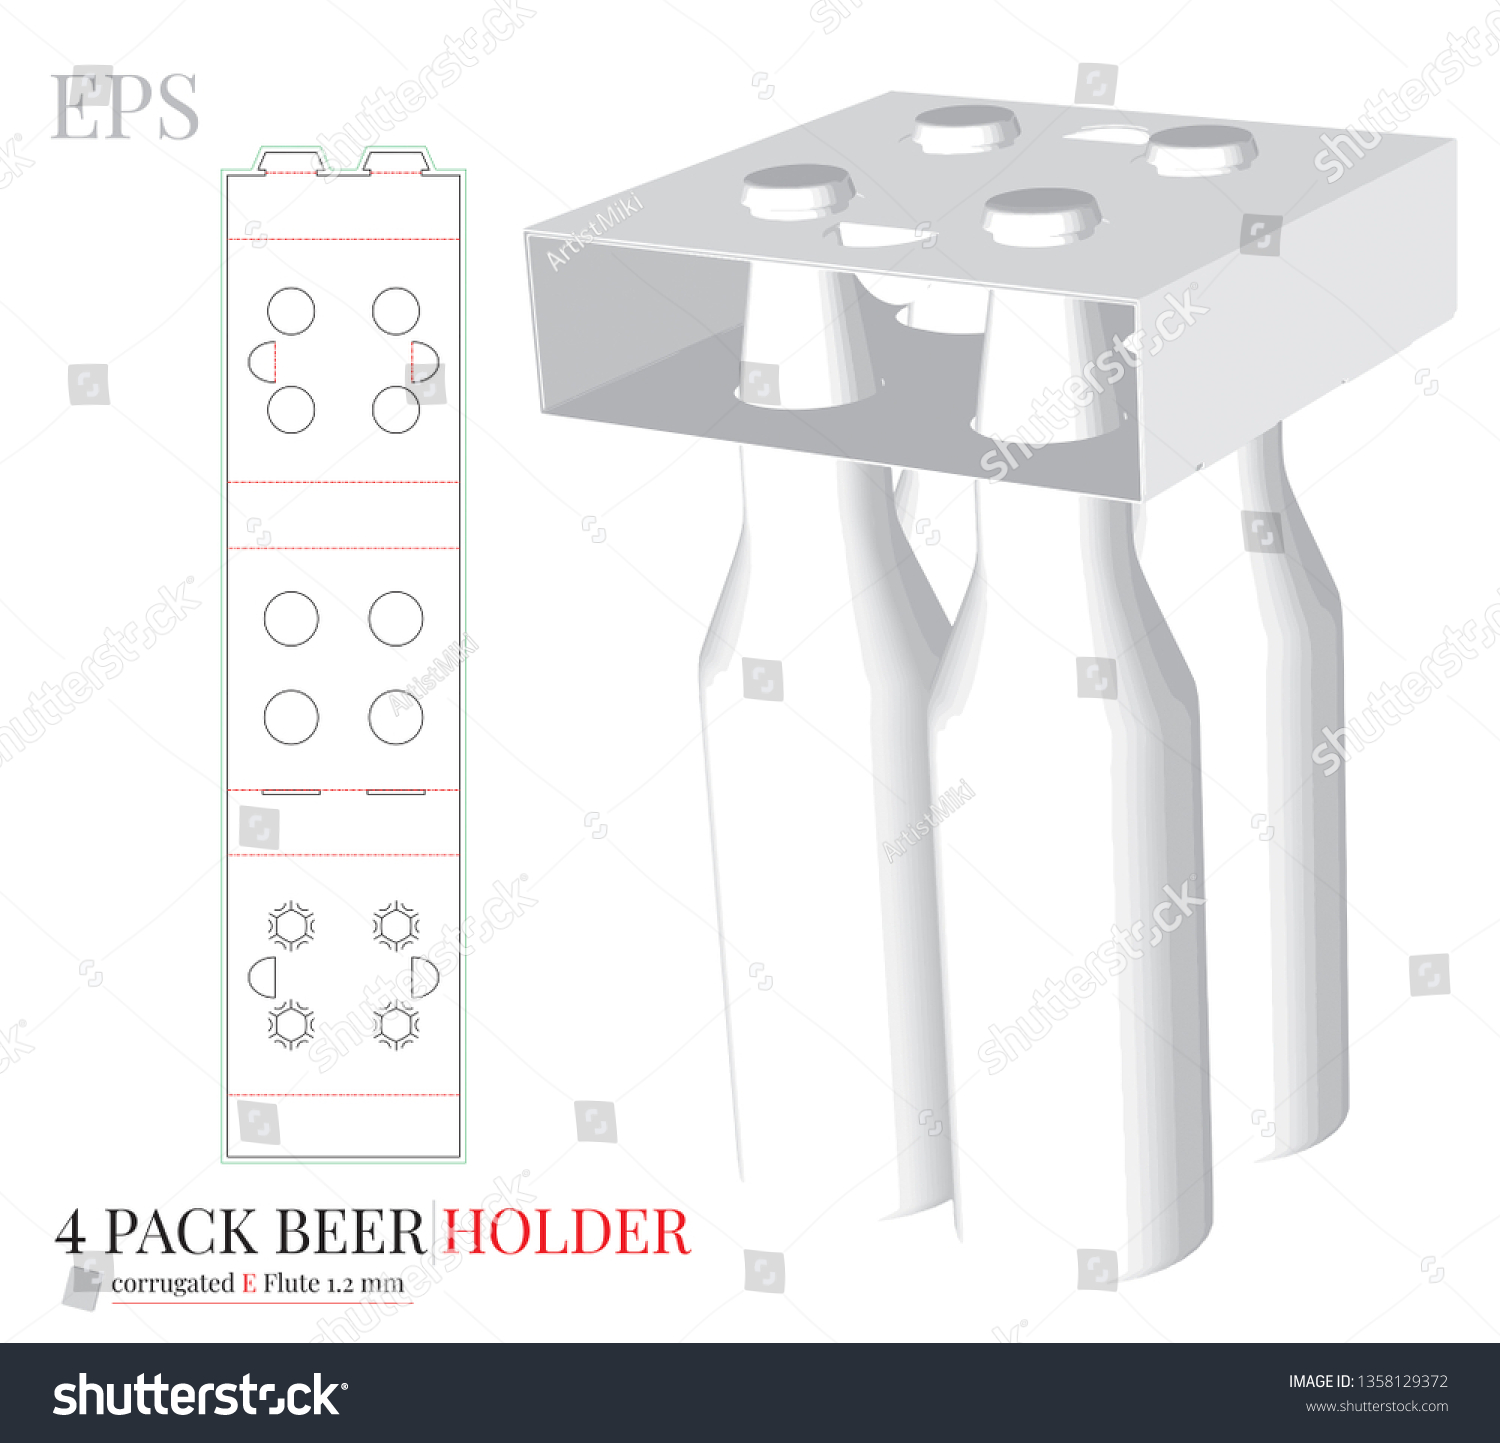 SVG of Bottle Holder Template, Four Pack Bottle Carrier with die lines. Self Lock, Vector with die cut, laser cut layers. White, clear, blank, isolated Beer Pack mock up on white background, perspective svg